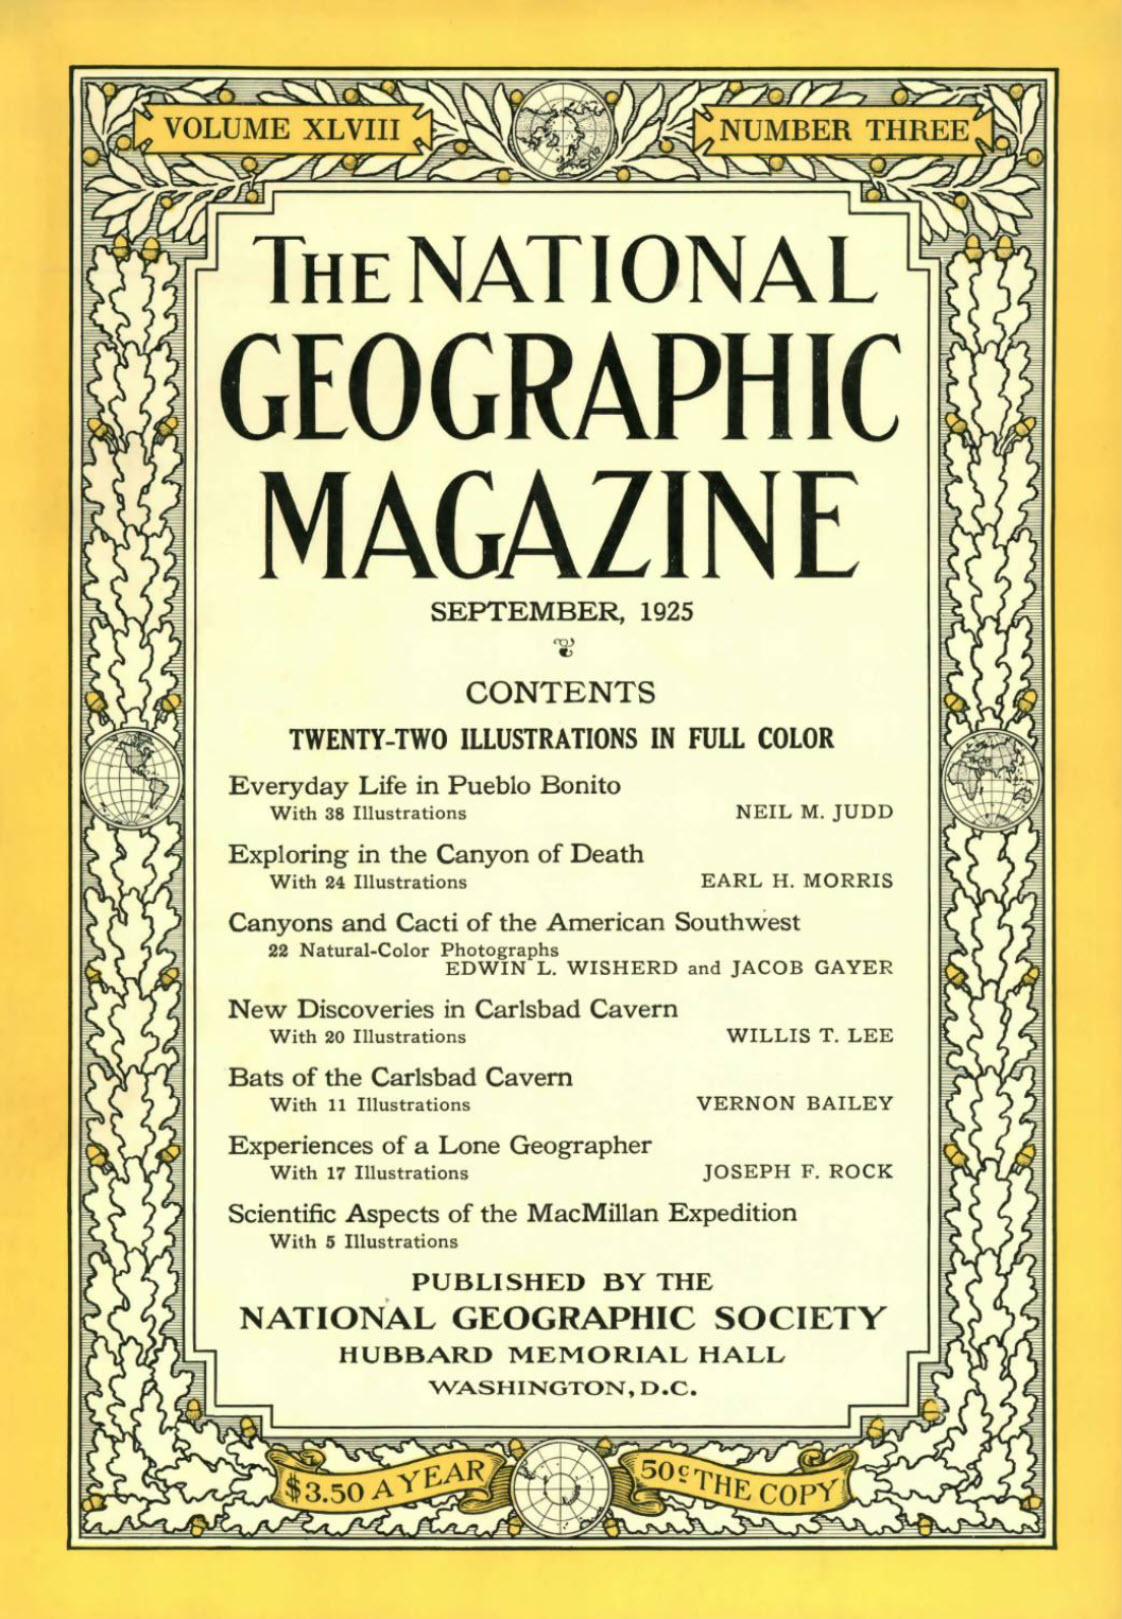 National Geographic, September 1925